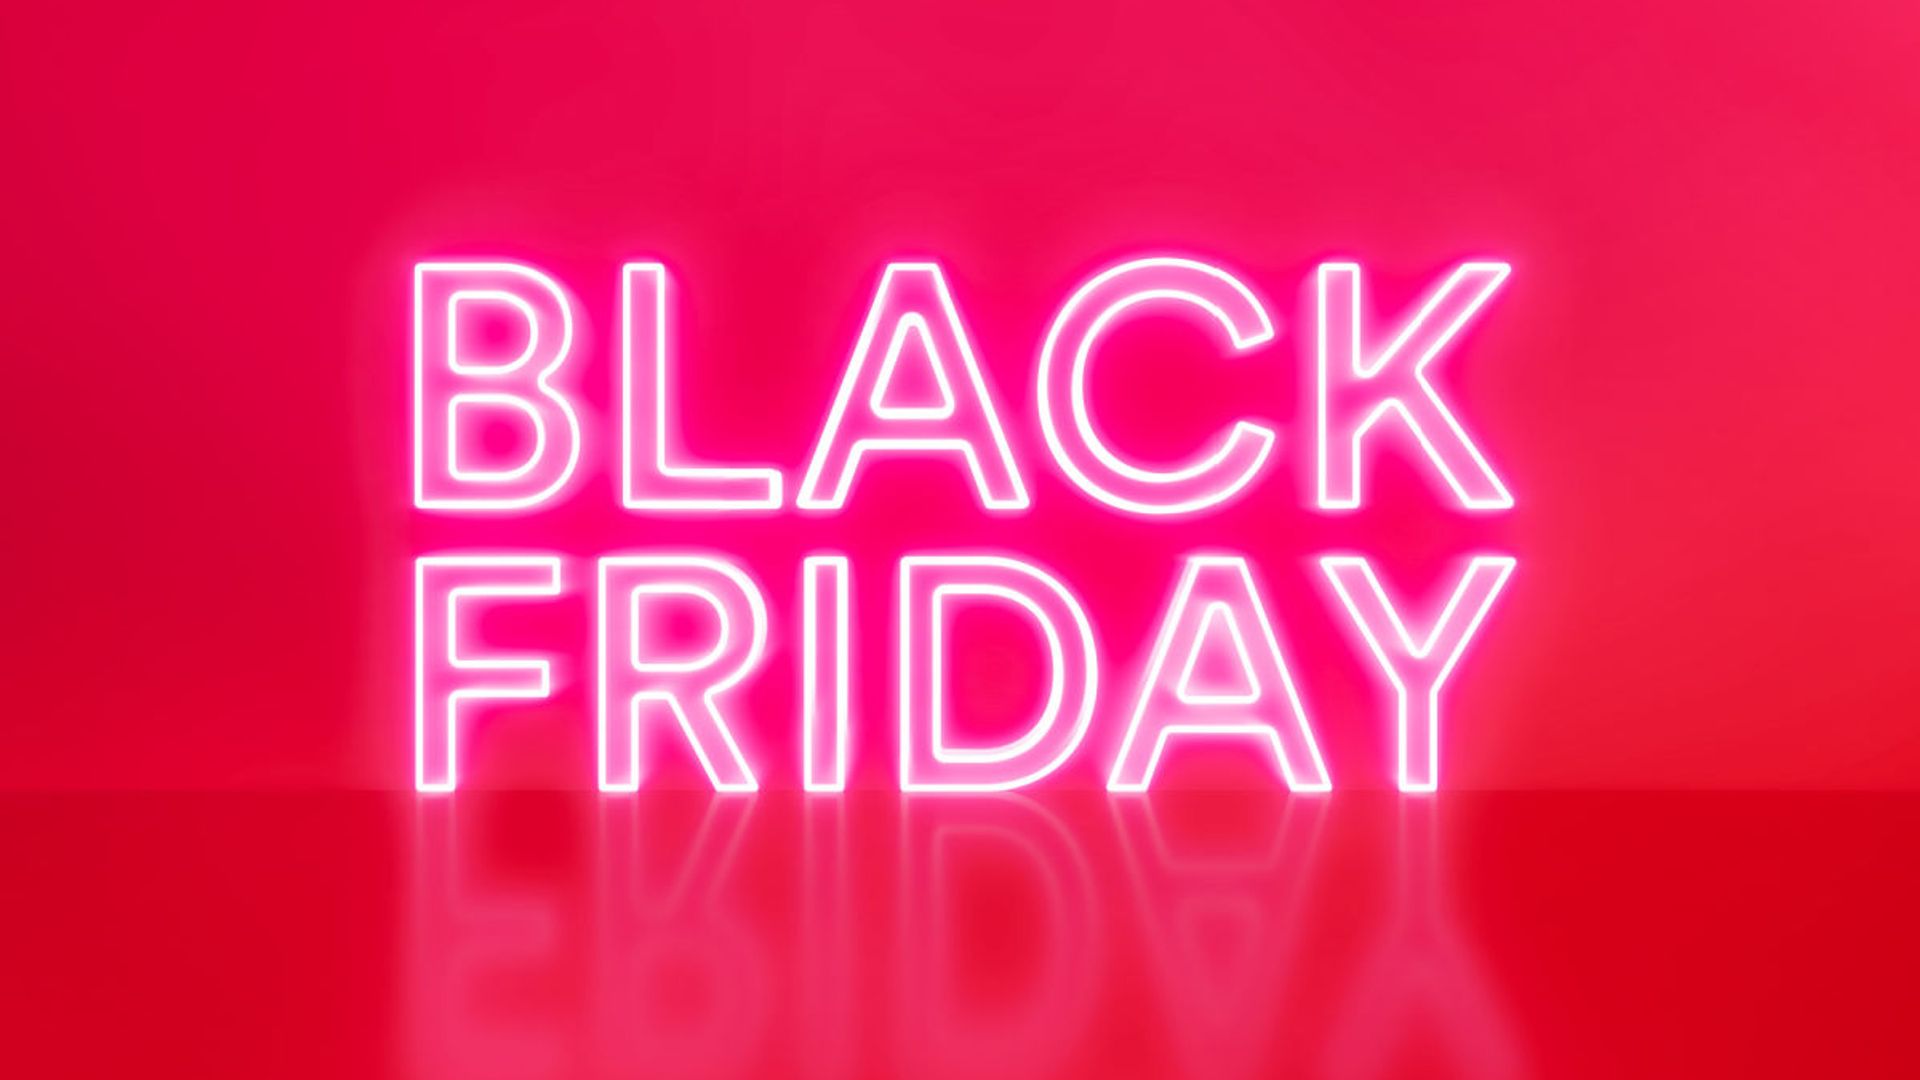 48 top Black Friday deals and offer codes: Nordstrom, Sephora & more